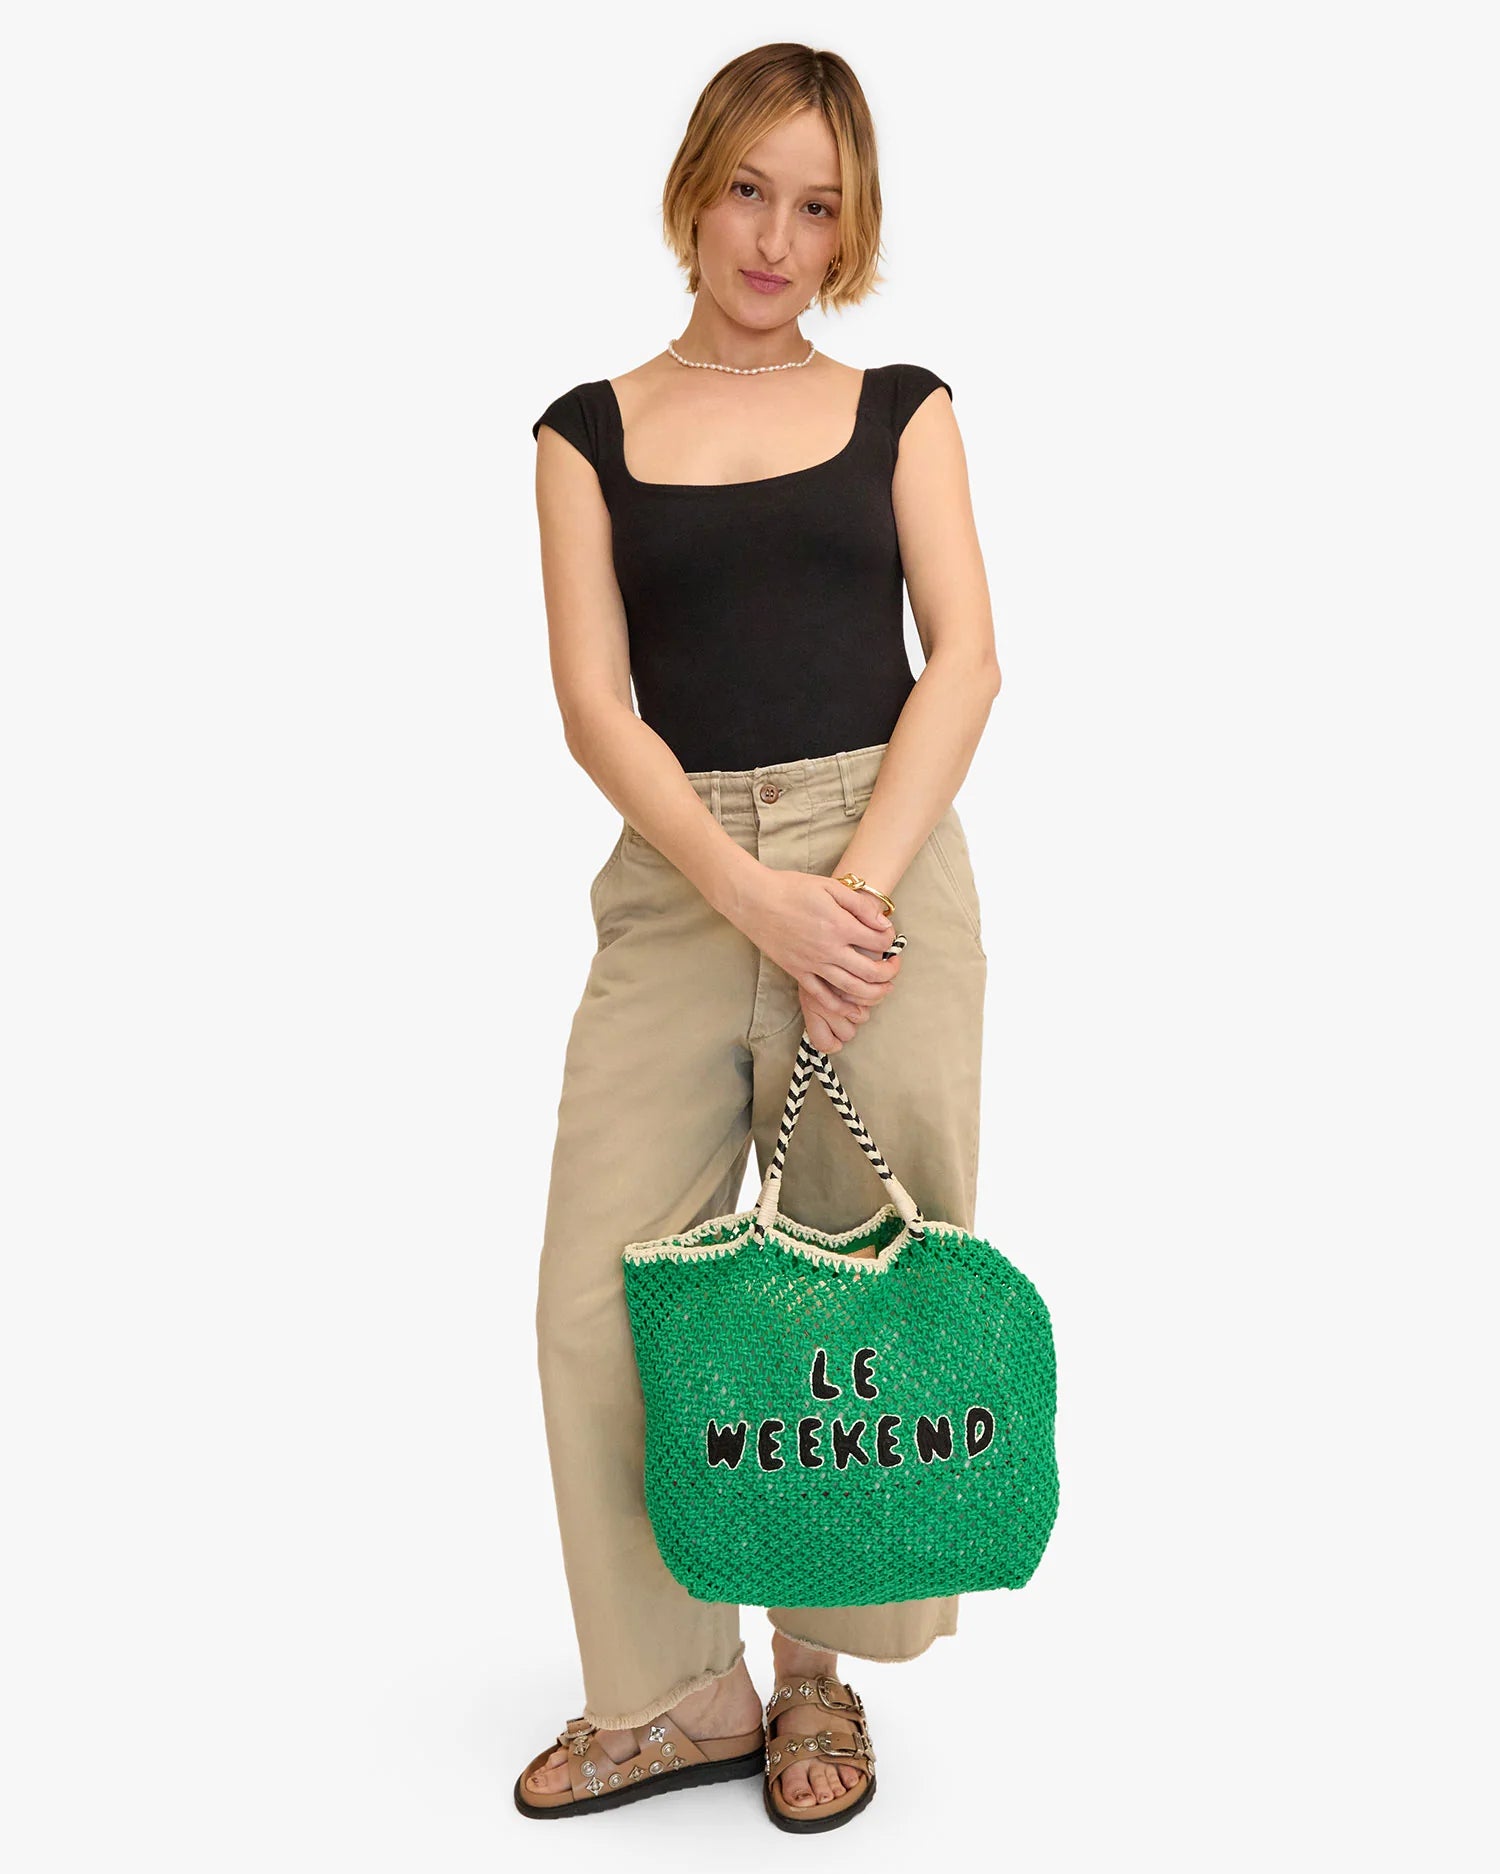 A person with short hair wears a black top, beige wide-legged pants, and sandals. They hold a large green Lete Tote by Clare Vivier with the words "Le Weekend" on it in black text. They have a neutral expression and stand in front of a plain white background.